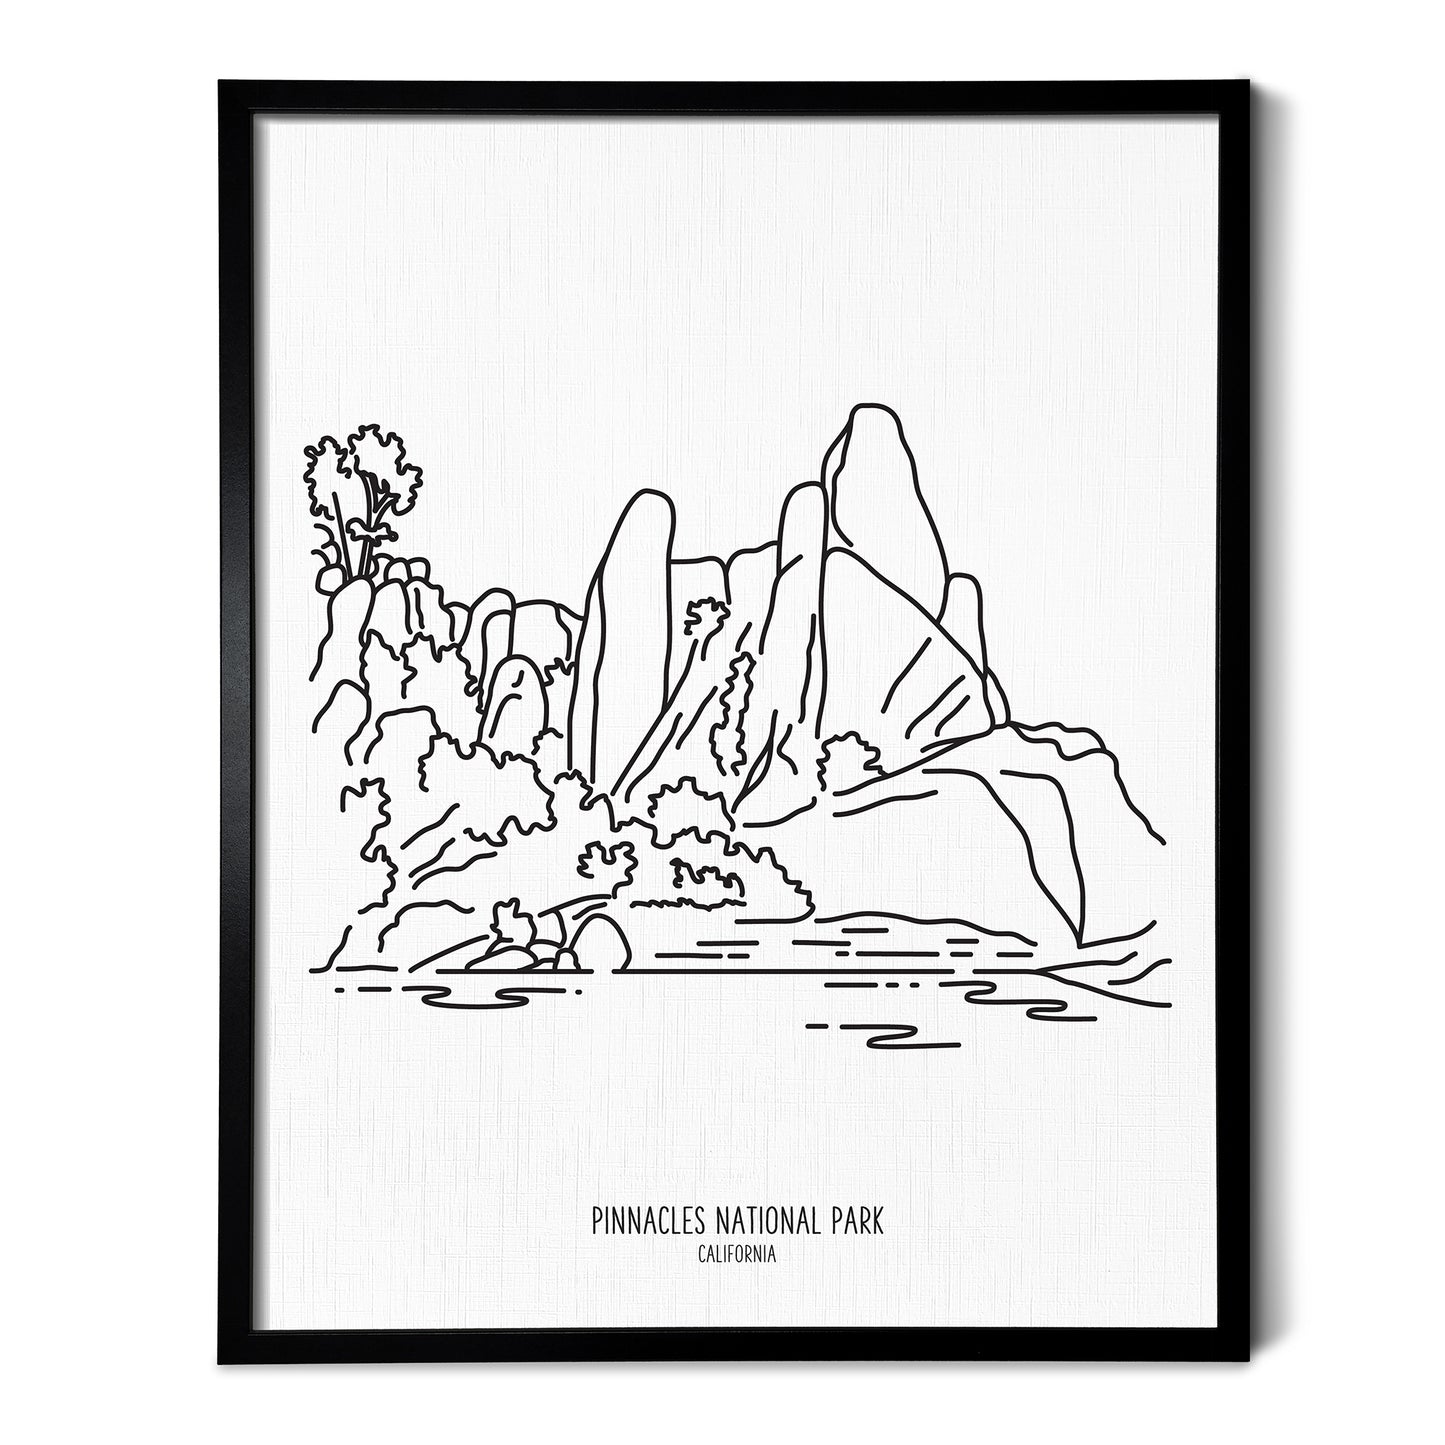 A line art drawing of Pinnacles National Park on white linen paper in a thin black picture frame